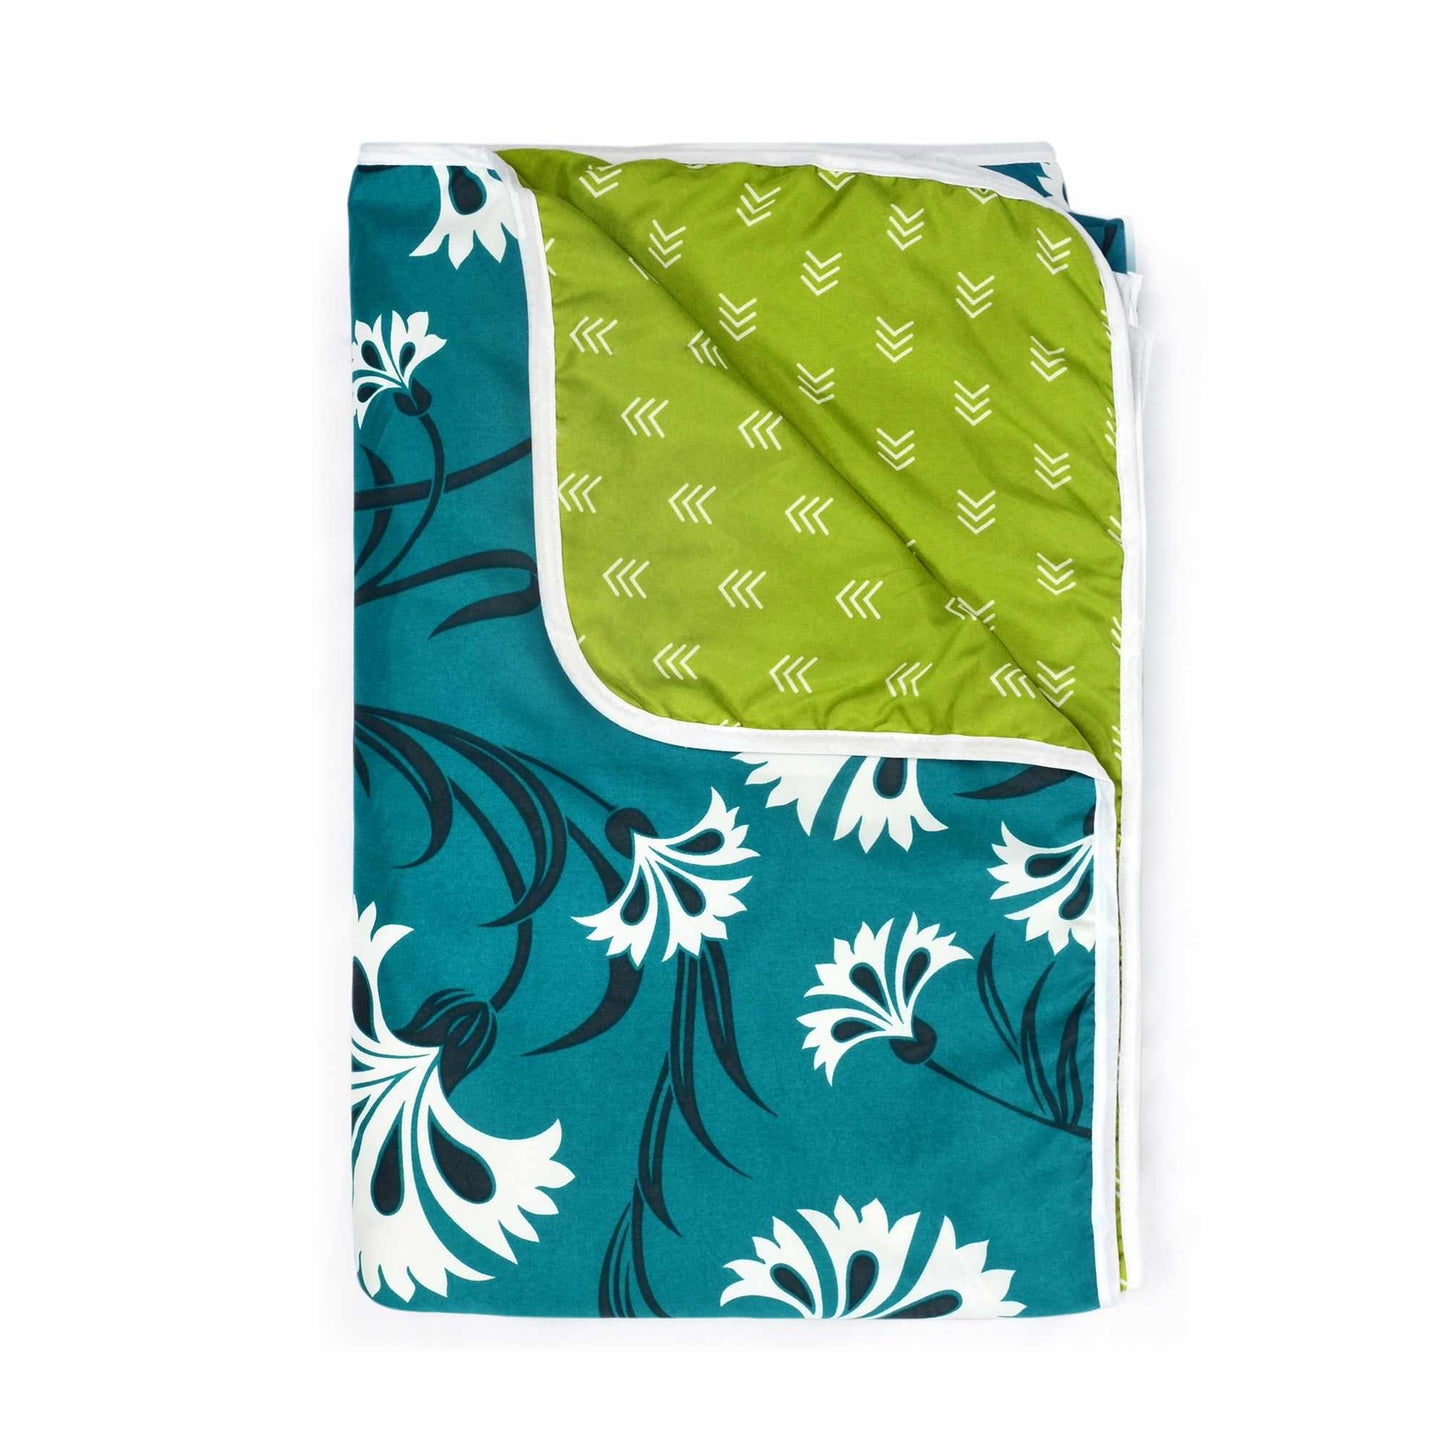 Blue and Green 120 GSM Microfiber Abstarct Floral Dual Print Pattern Double Bed AC Blanket Dohar for All Season